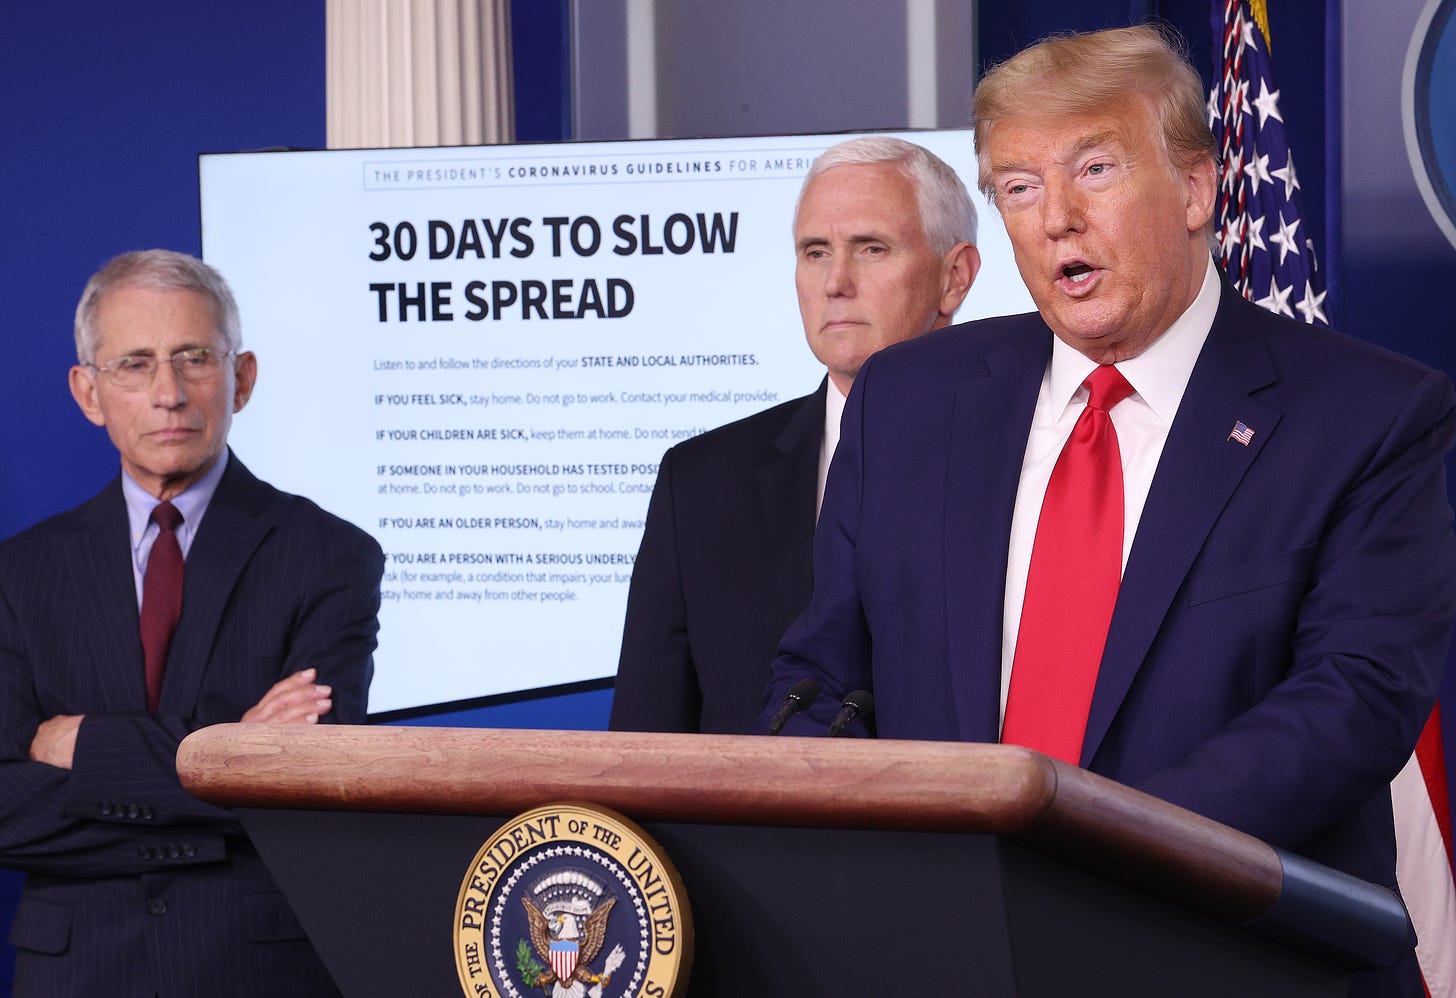 Dr. Anthony Fauci, Mike Pence, and Donald Trump stand in front of a graphic titled "30 DAYS TO SLOW THE SPREAD" on March 31, 2020